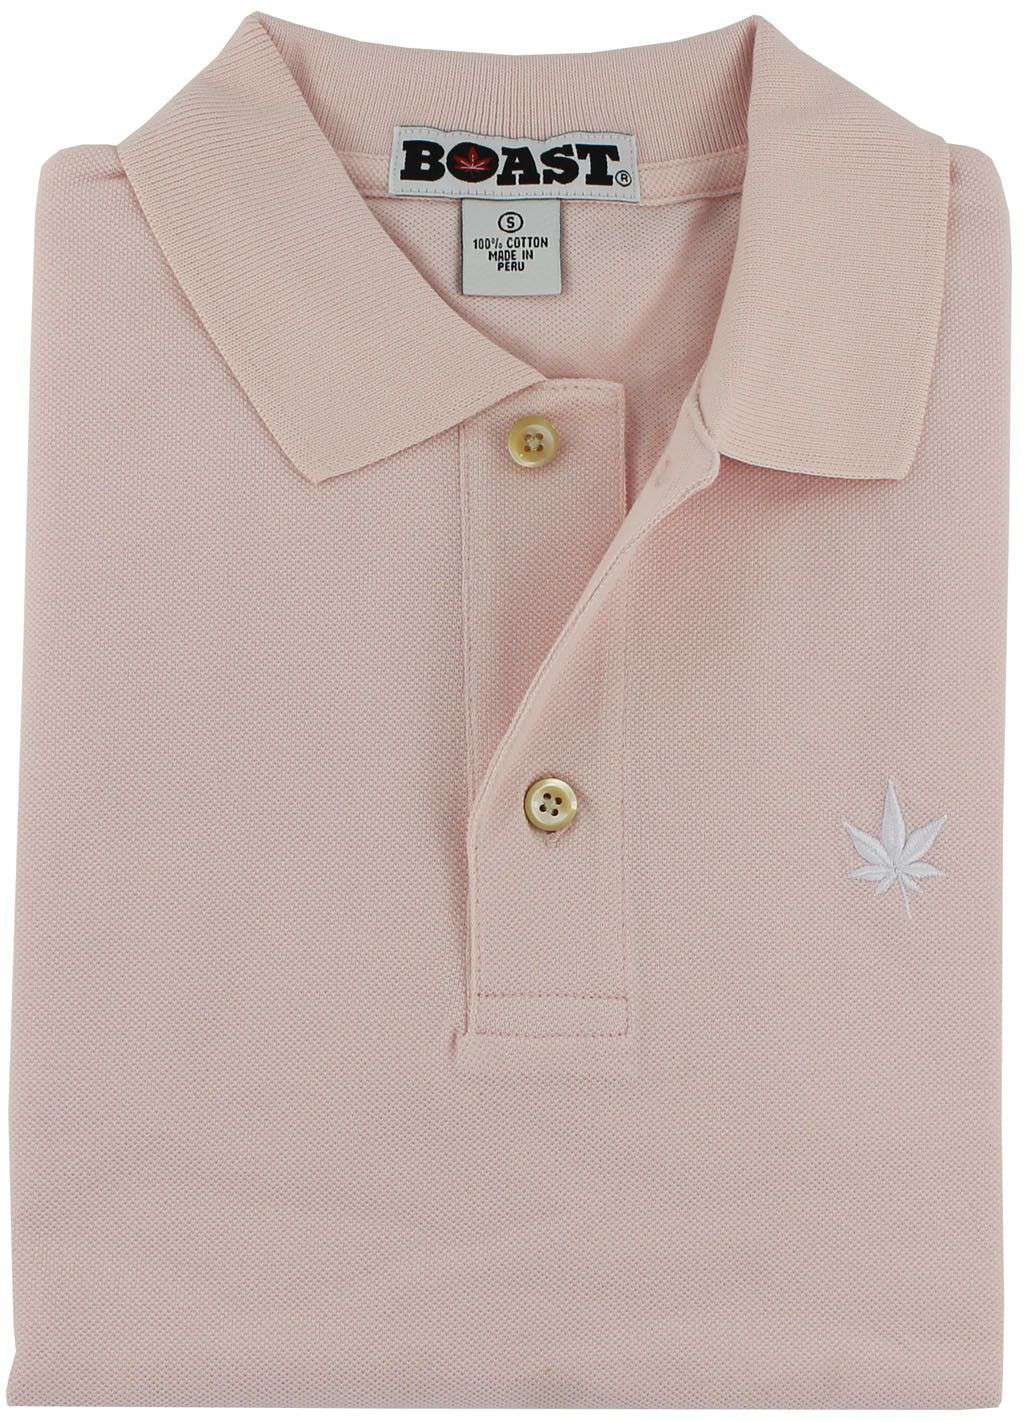 Solid Classic Polo in Chalk Pink by Boast - Country Club Prep